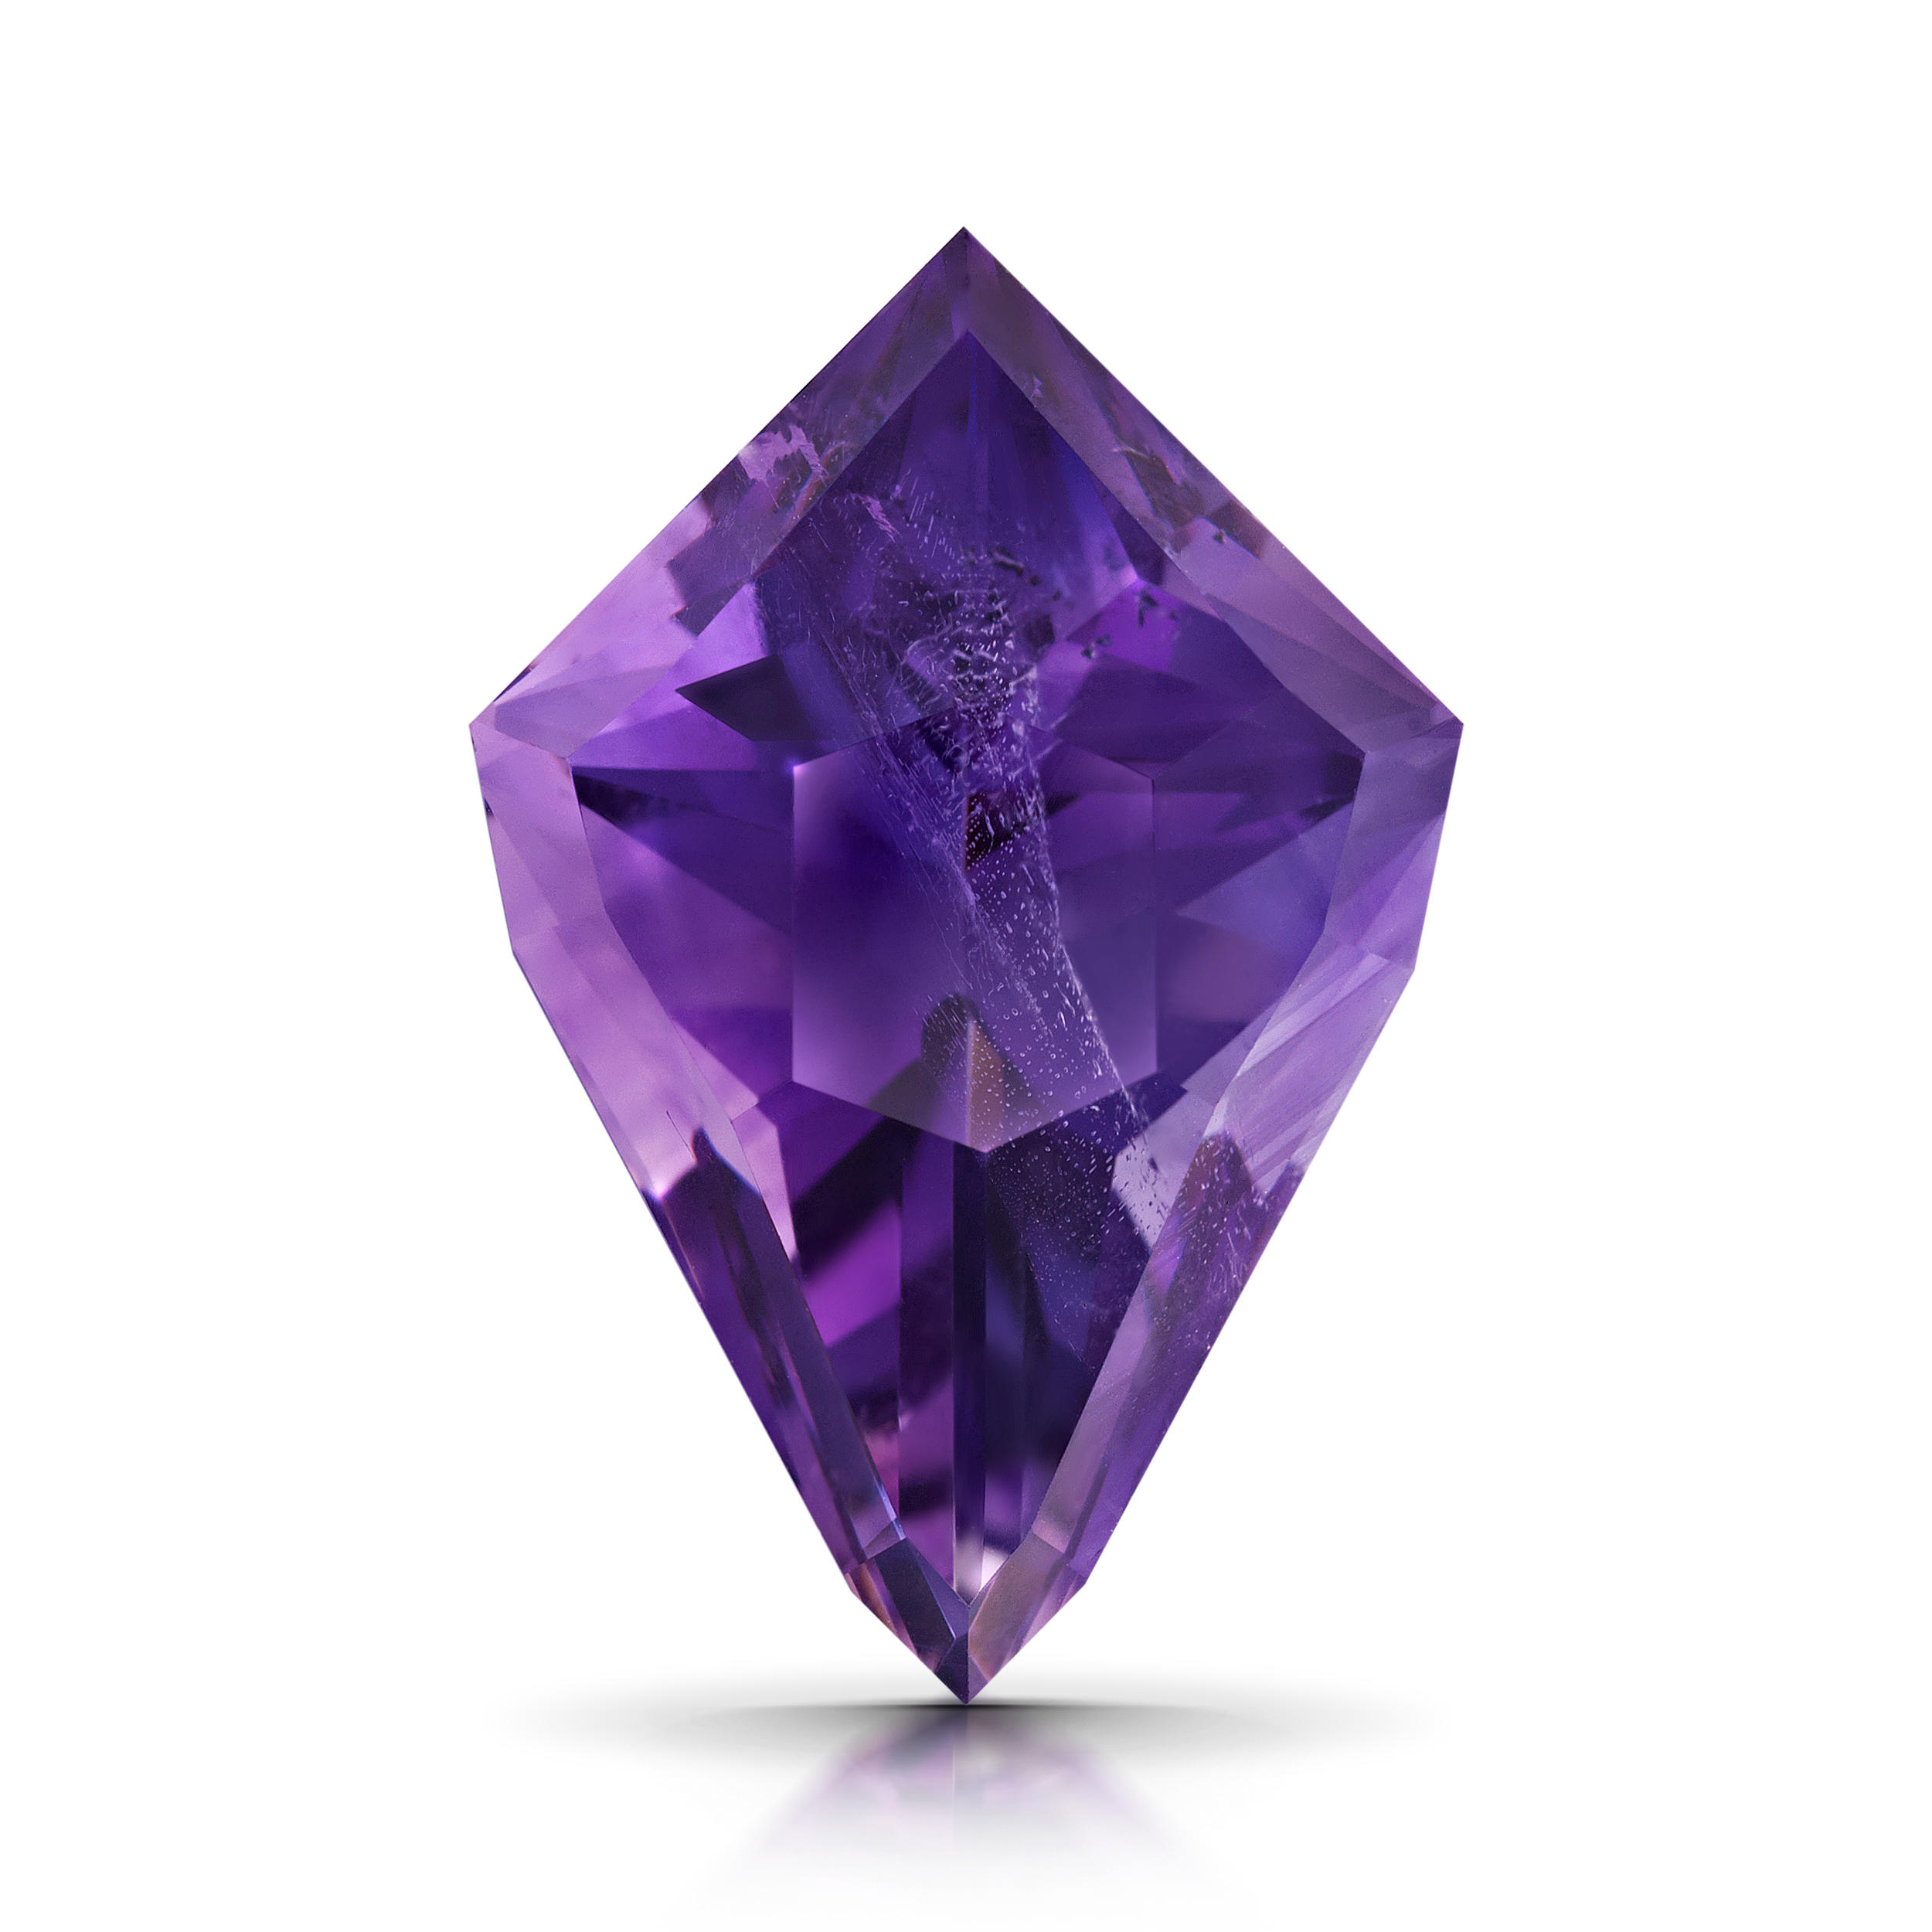 Amethyst download the new version for ipod